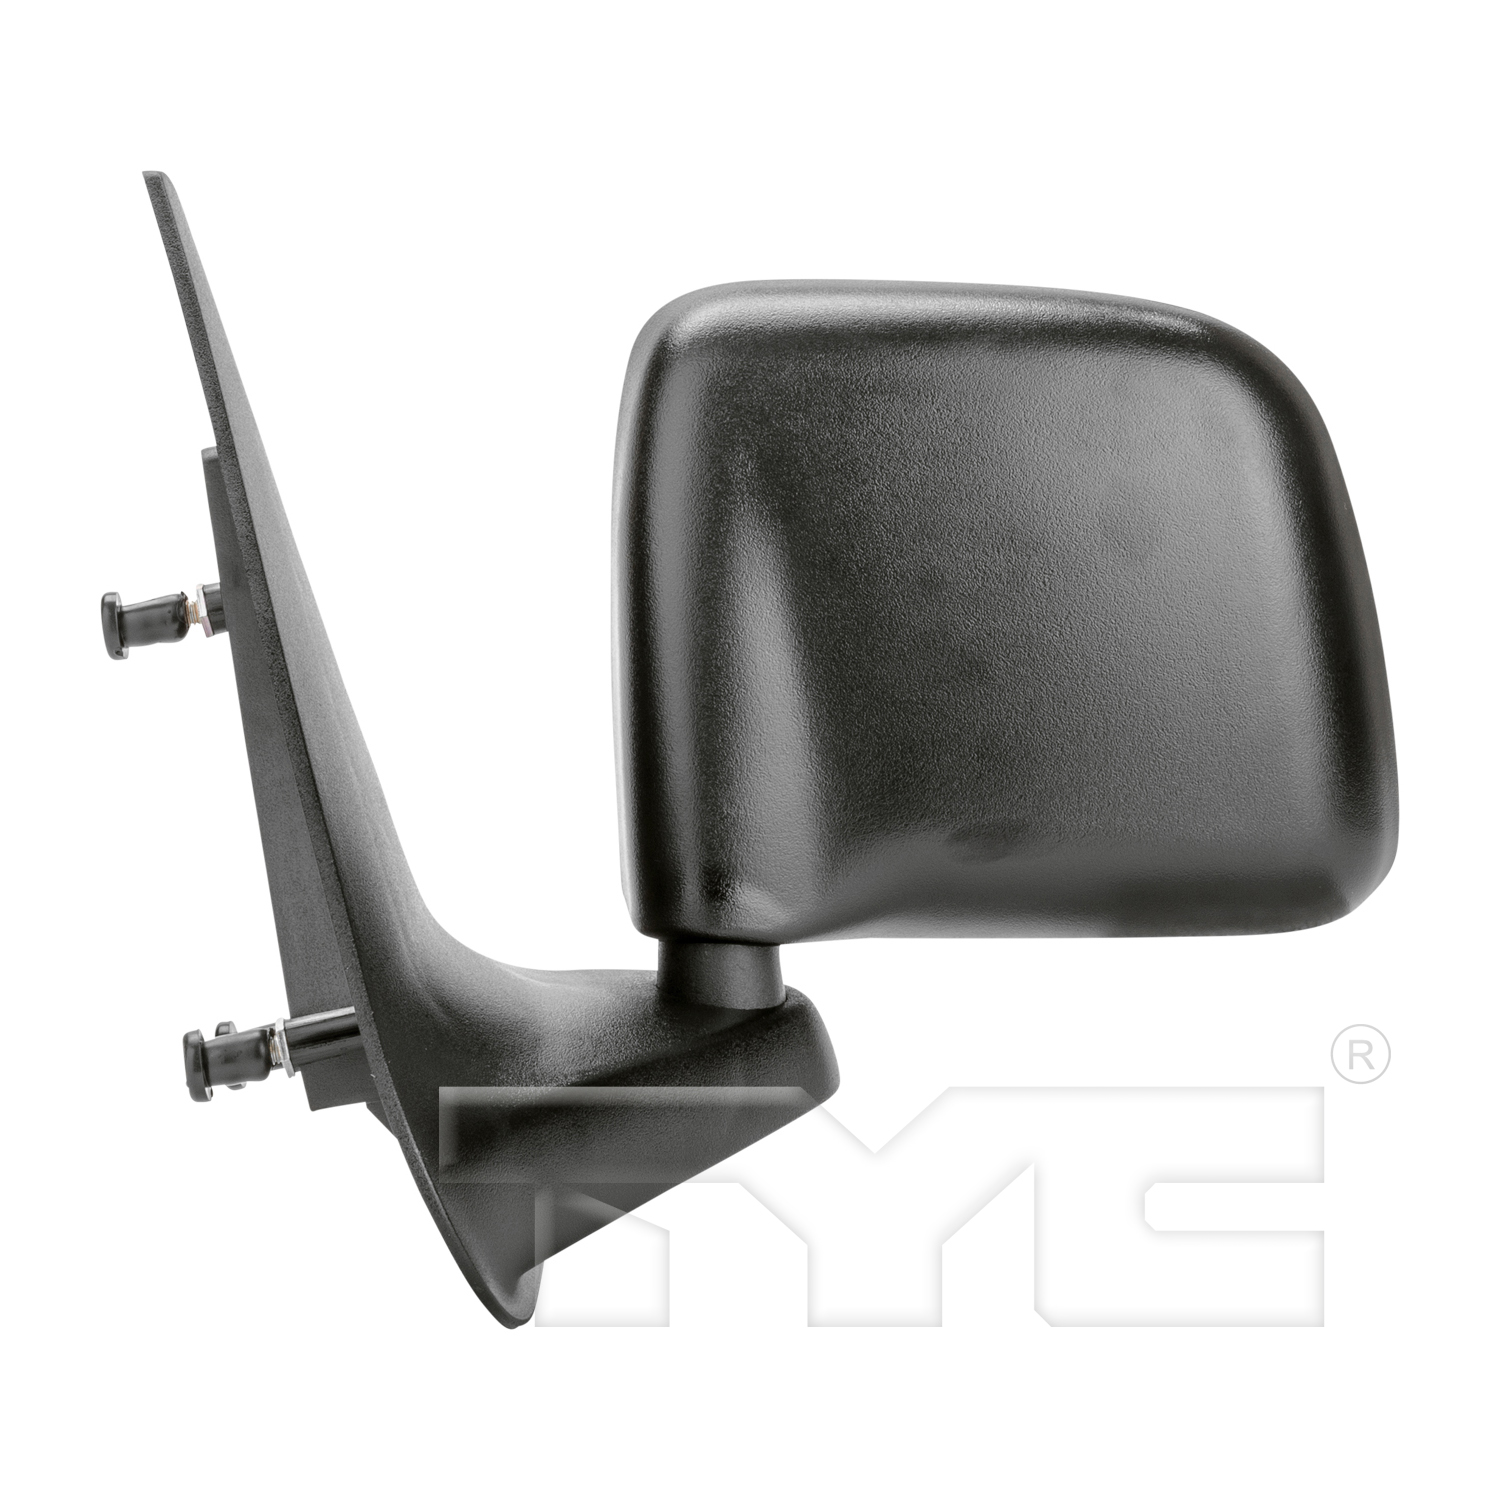 Aftermarket MIRRORS for MAZDA - B4000, B4000,94-98,LT Mirror outside rear view